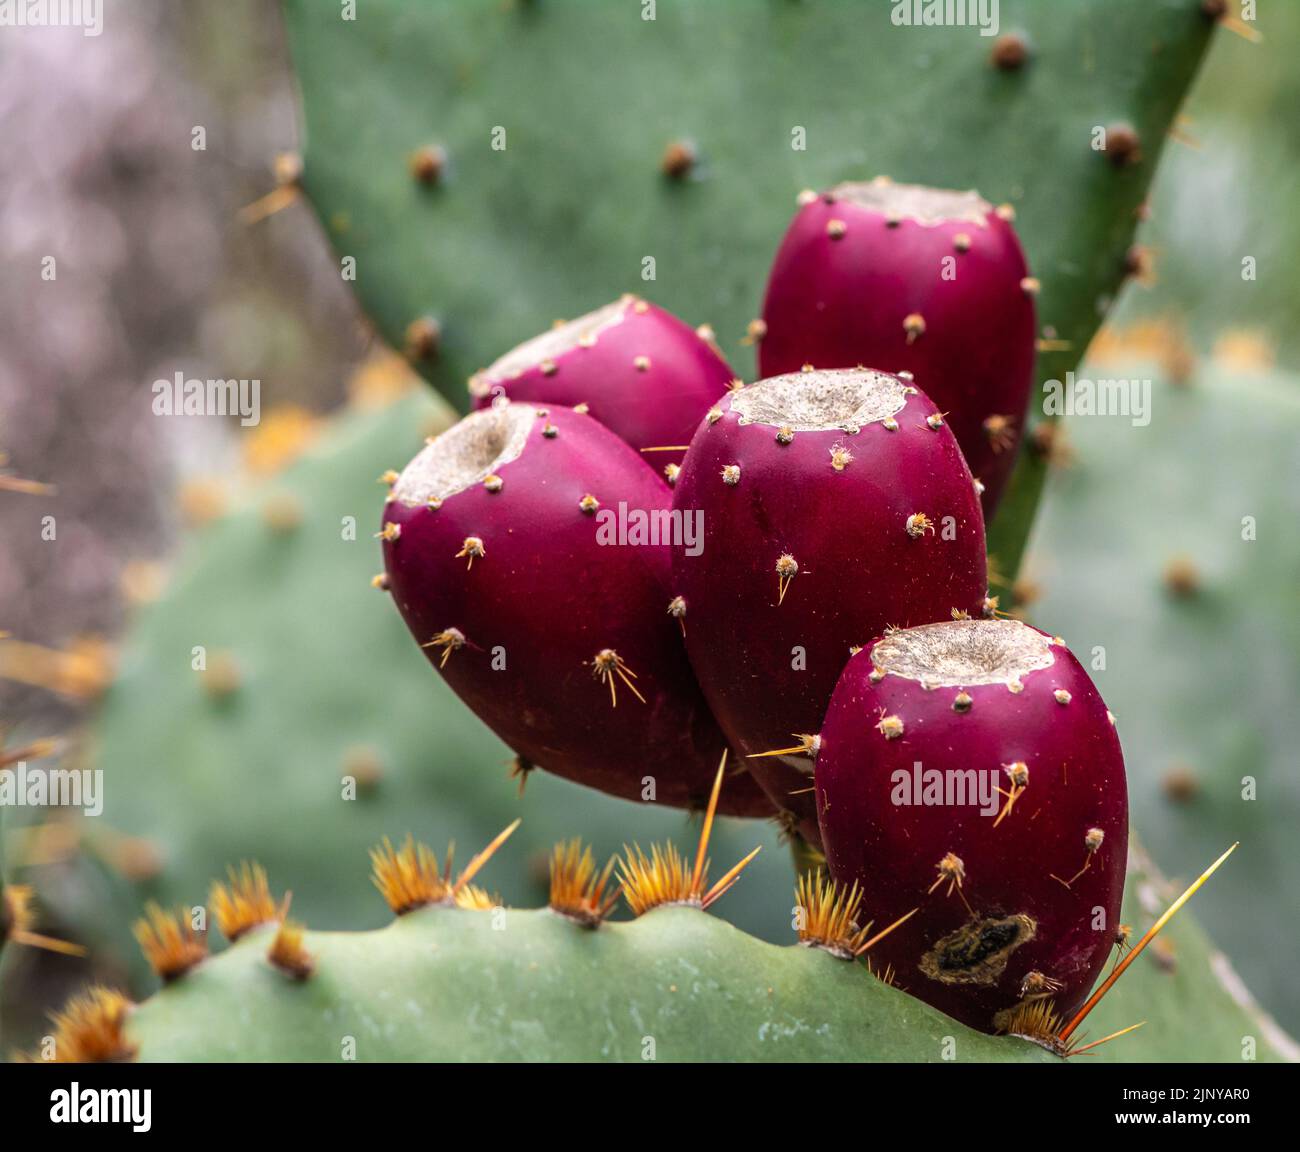 Opuntia ficus-indica, cactus pear or prickly pear, with red fruits - selective focus Stock Photo